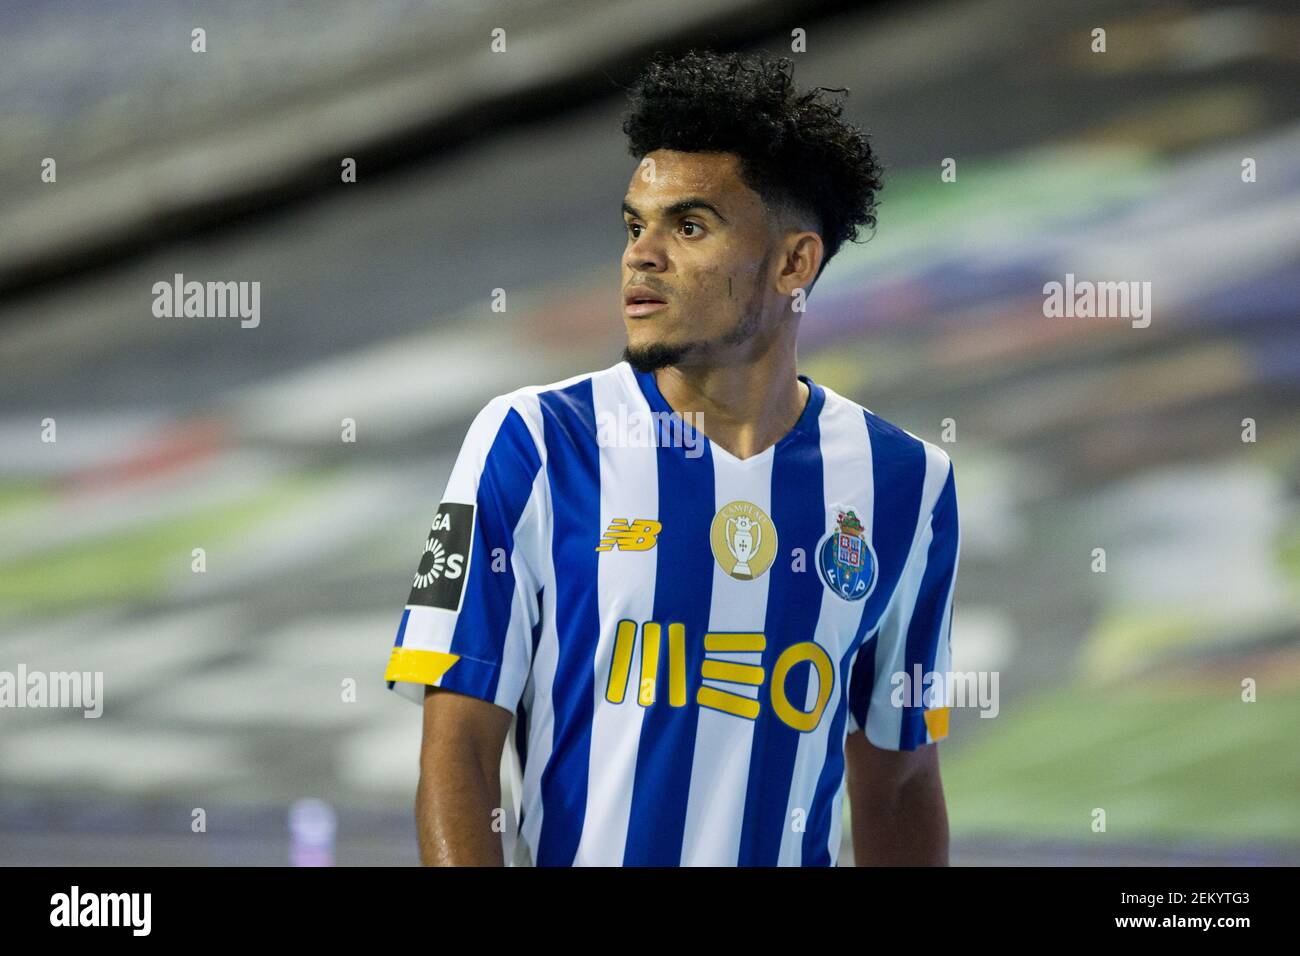 FC Porto's player Luis Diaz seen in action during the match between FC Porto  and Portimonense for the Portuguese First League at Dragon Stadium. (Final  score; FC Porto 3:1 Portimonense) (Photo by